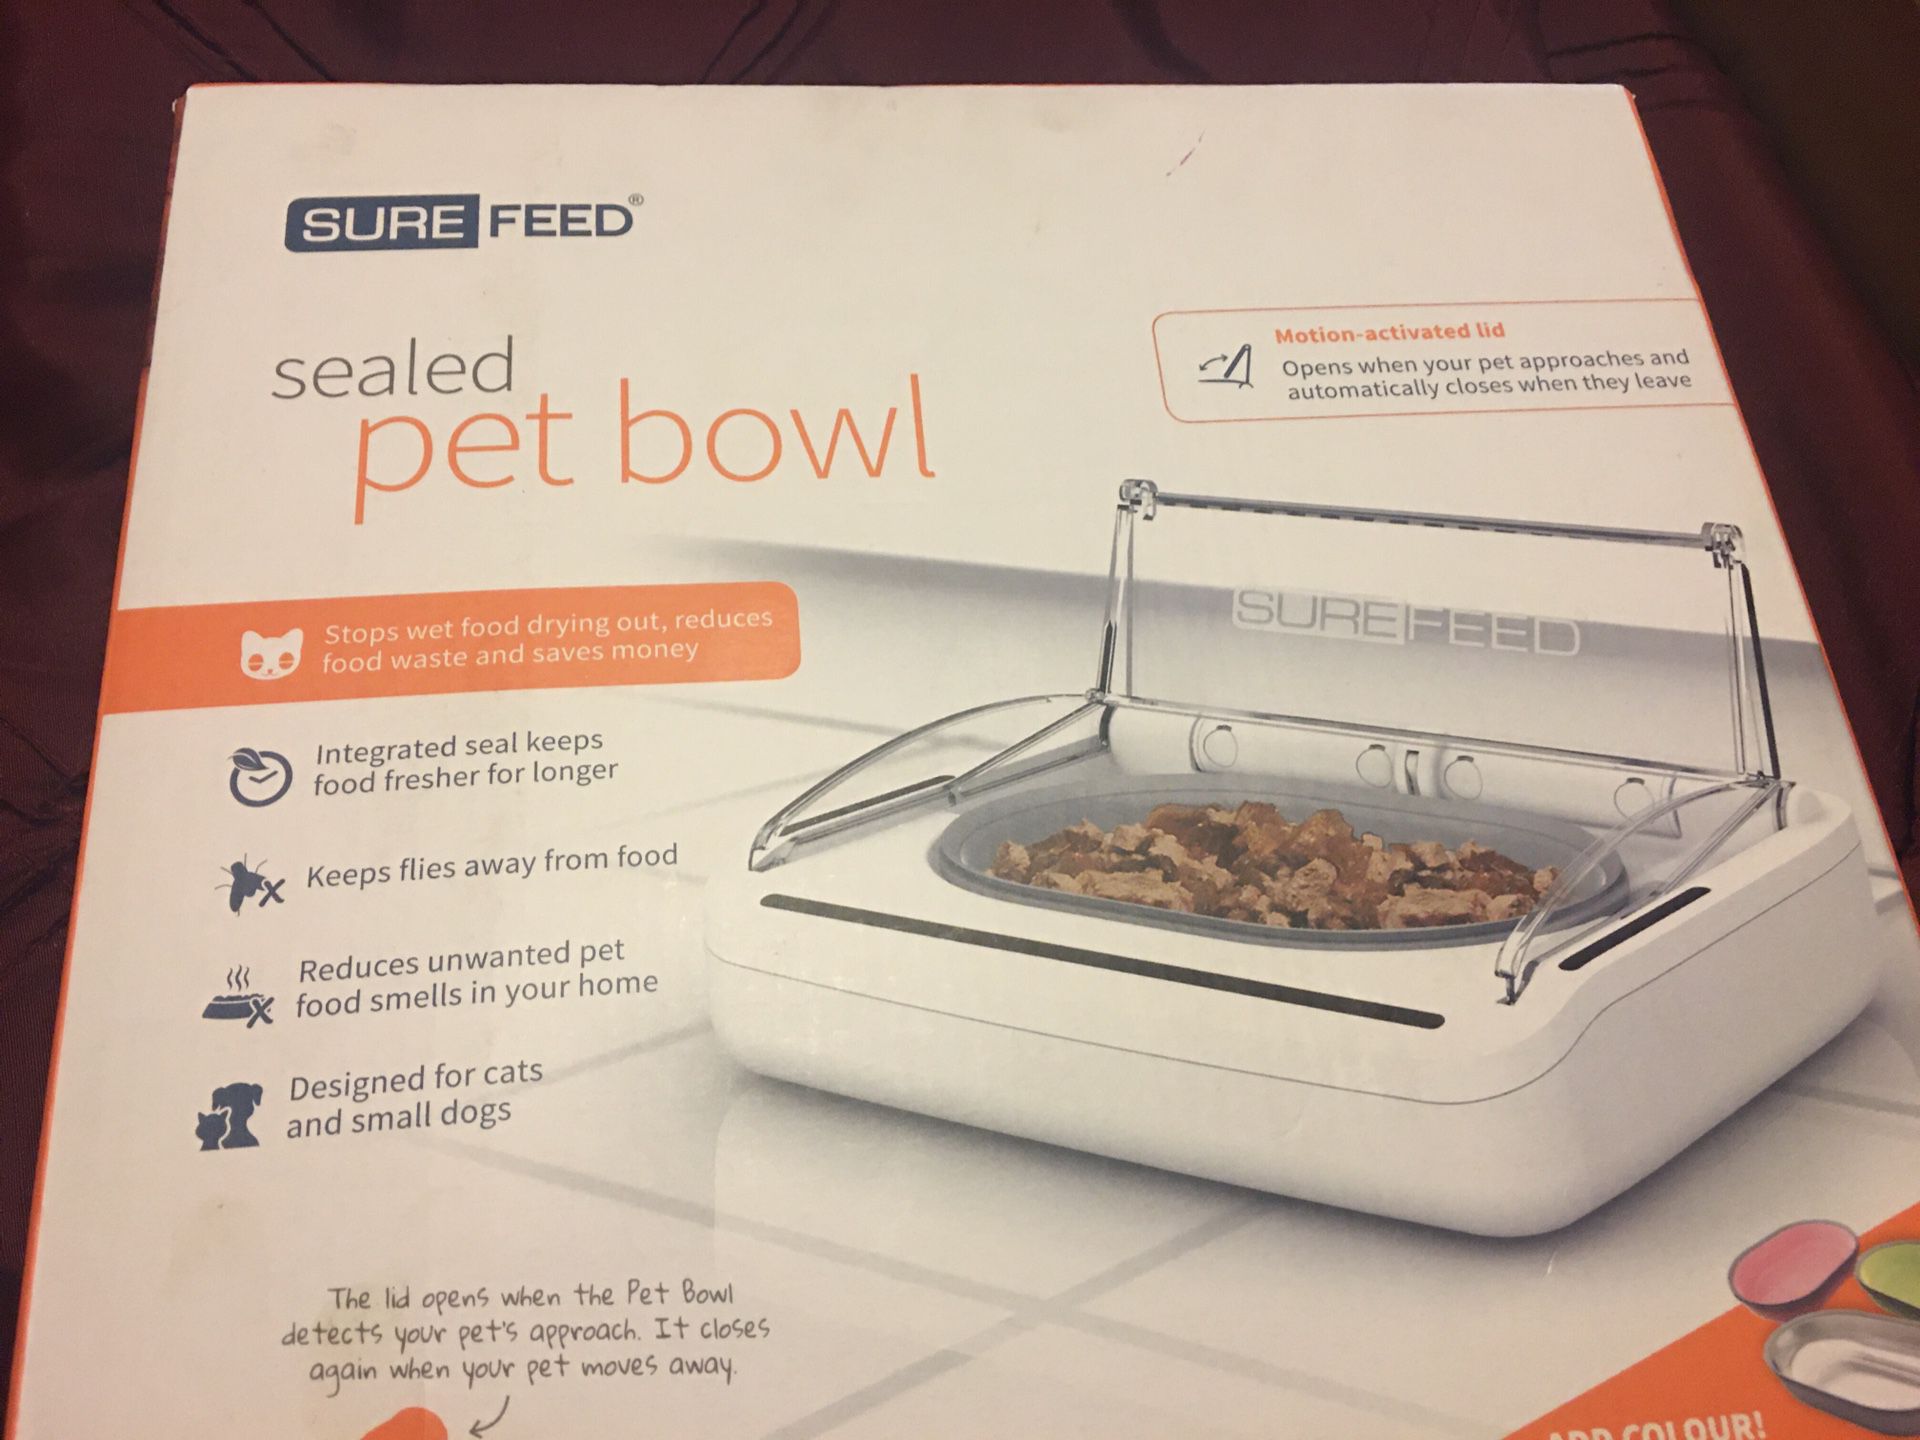 Pet bowl, new in the box, stop wet food drying out and will save $$, integrated seal keep food for longer, keep flies away from food, reduces unwanted